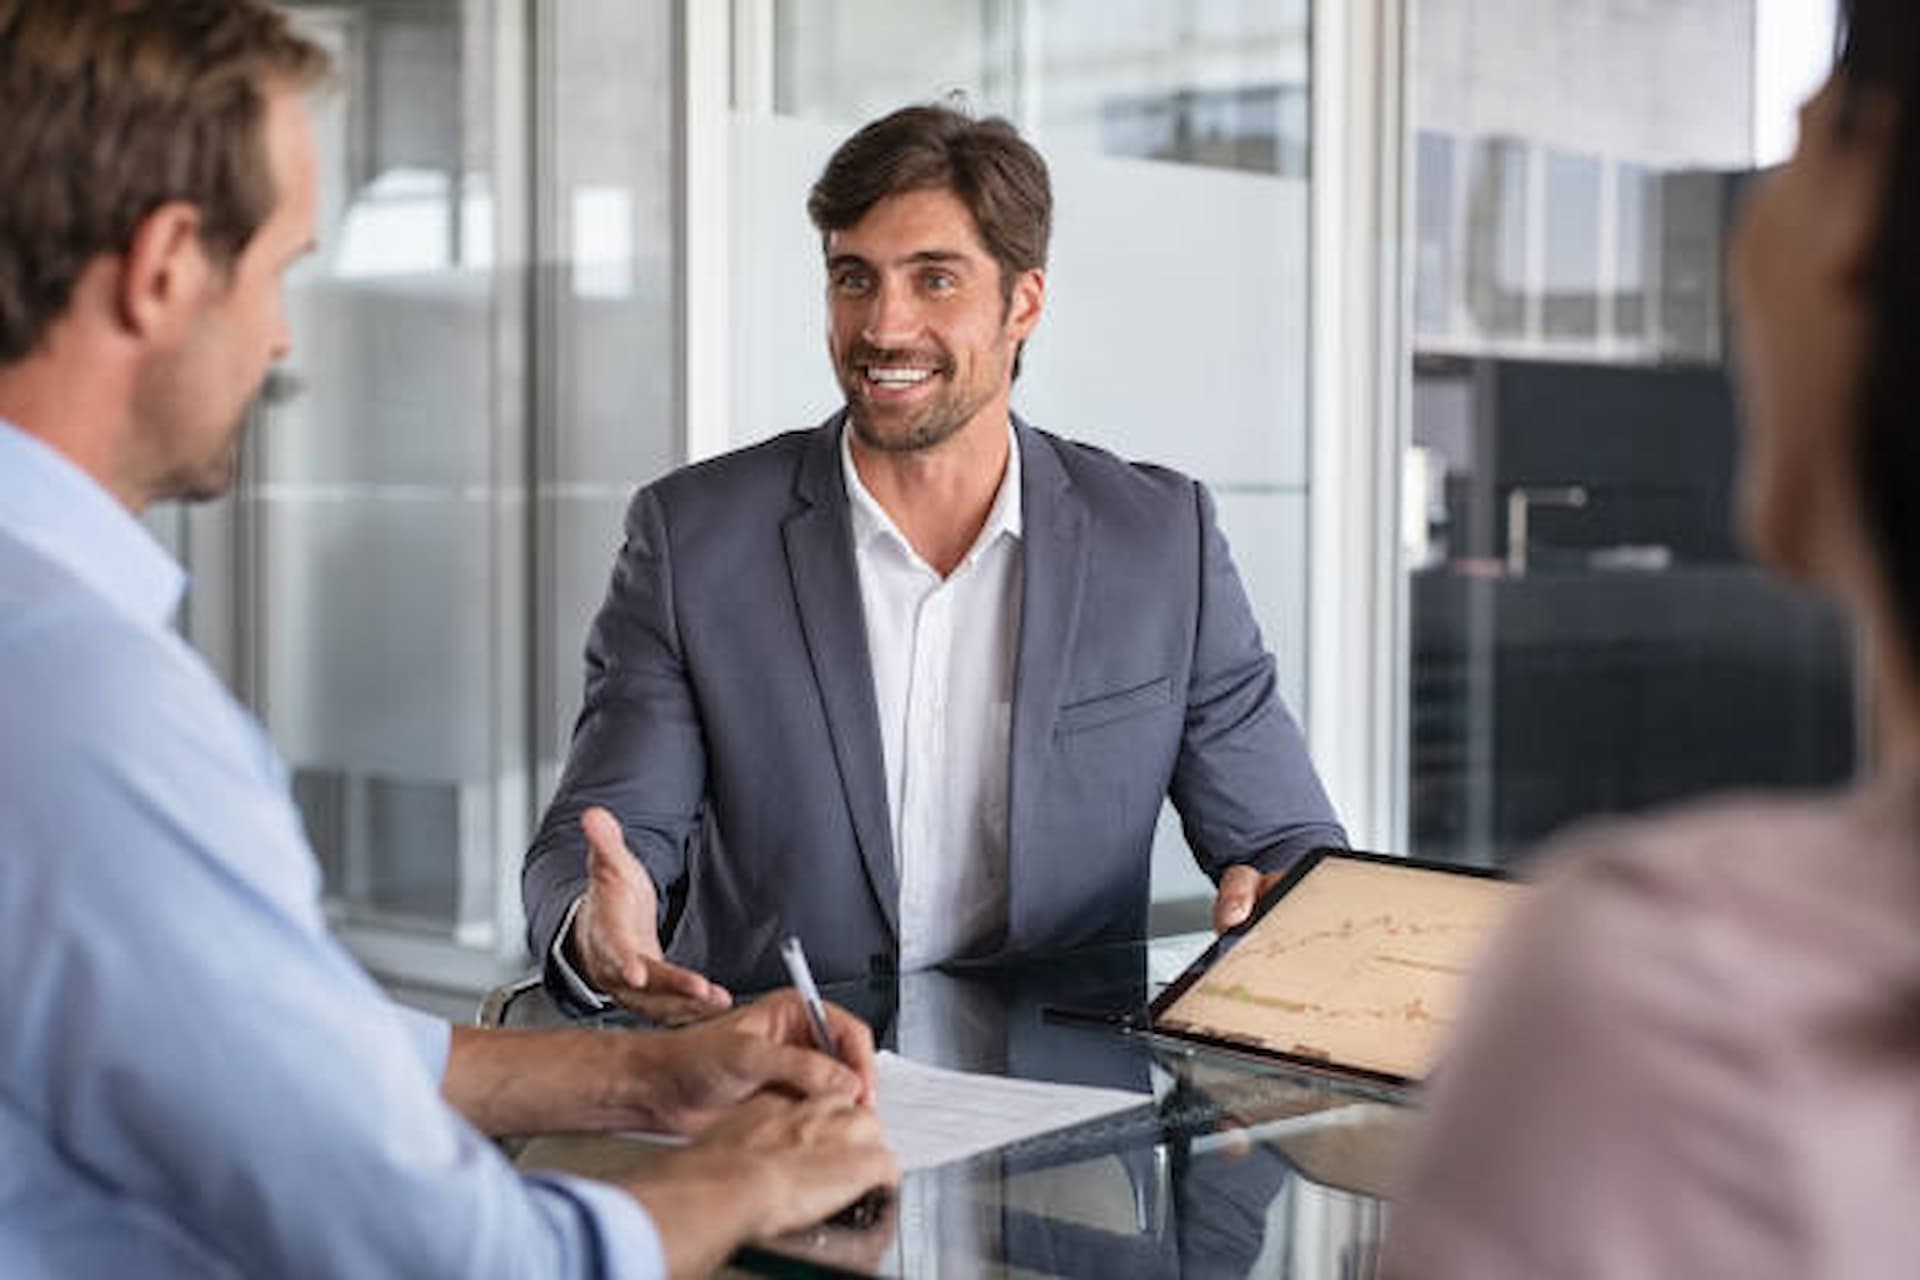 What To Look For In A Trustworthy And Effective Business Broker - Financial Advisers Blog